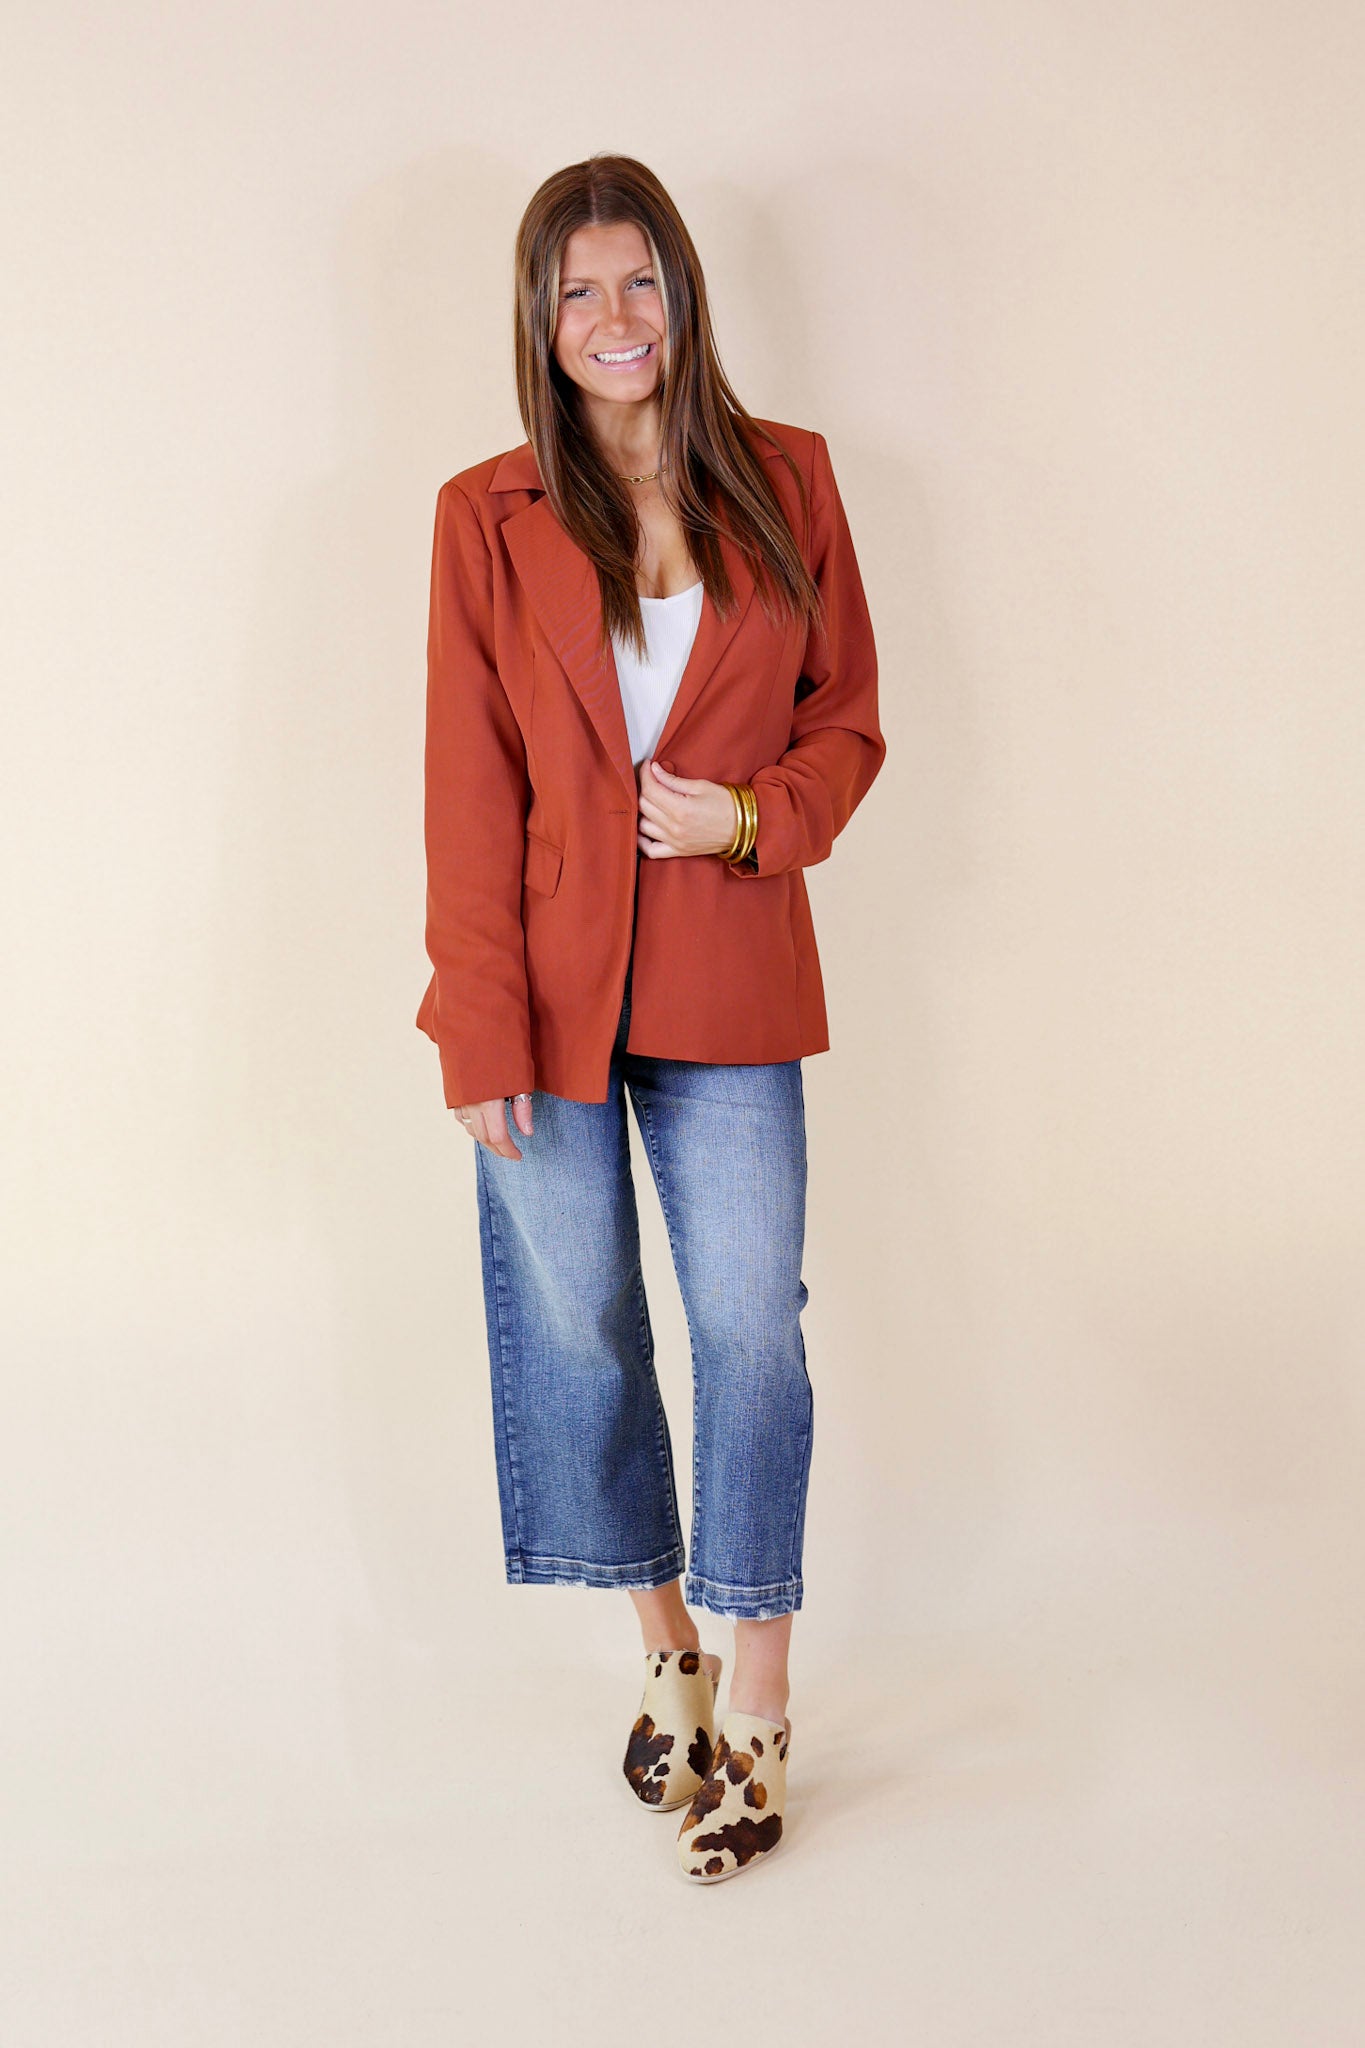 Winning Awards Long Sleeve Blazer in Rust Brown - Giddy Up Glamour Boutique